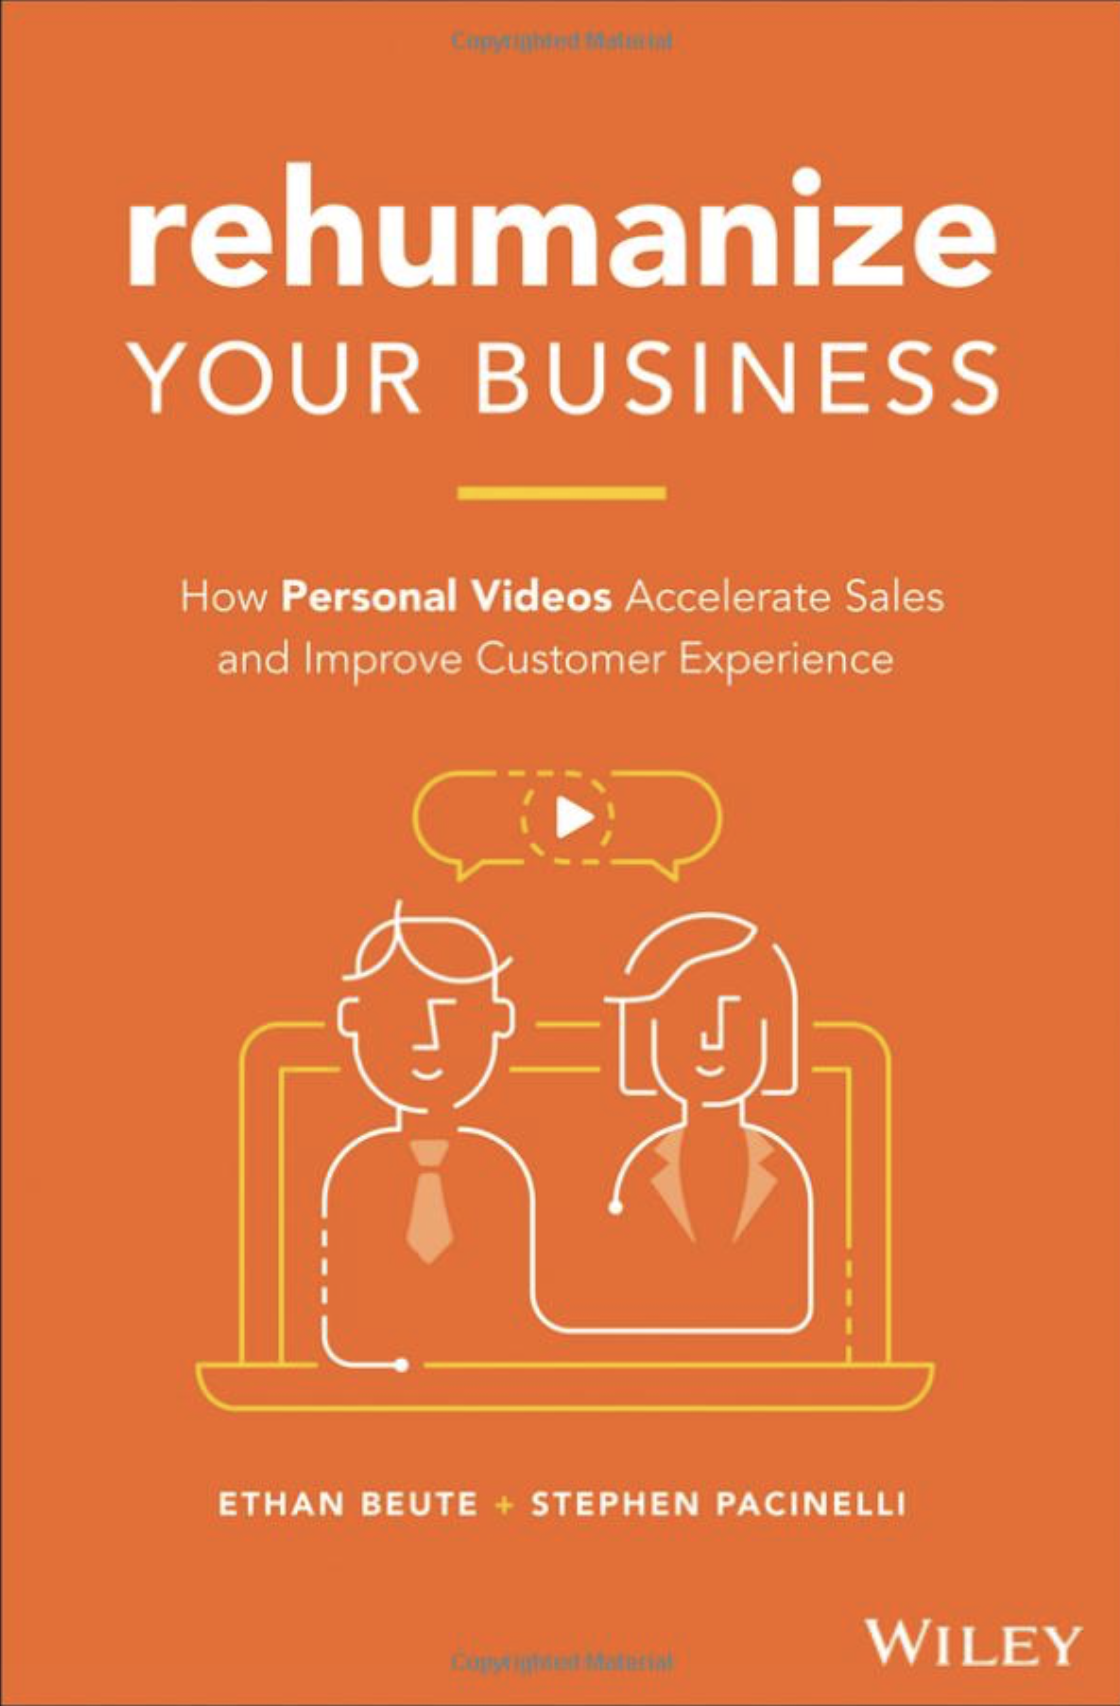 Book cover of &ldquo;Rehumazing your business&rdquo;